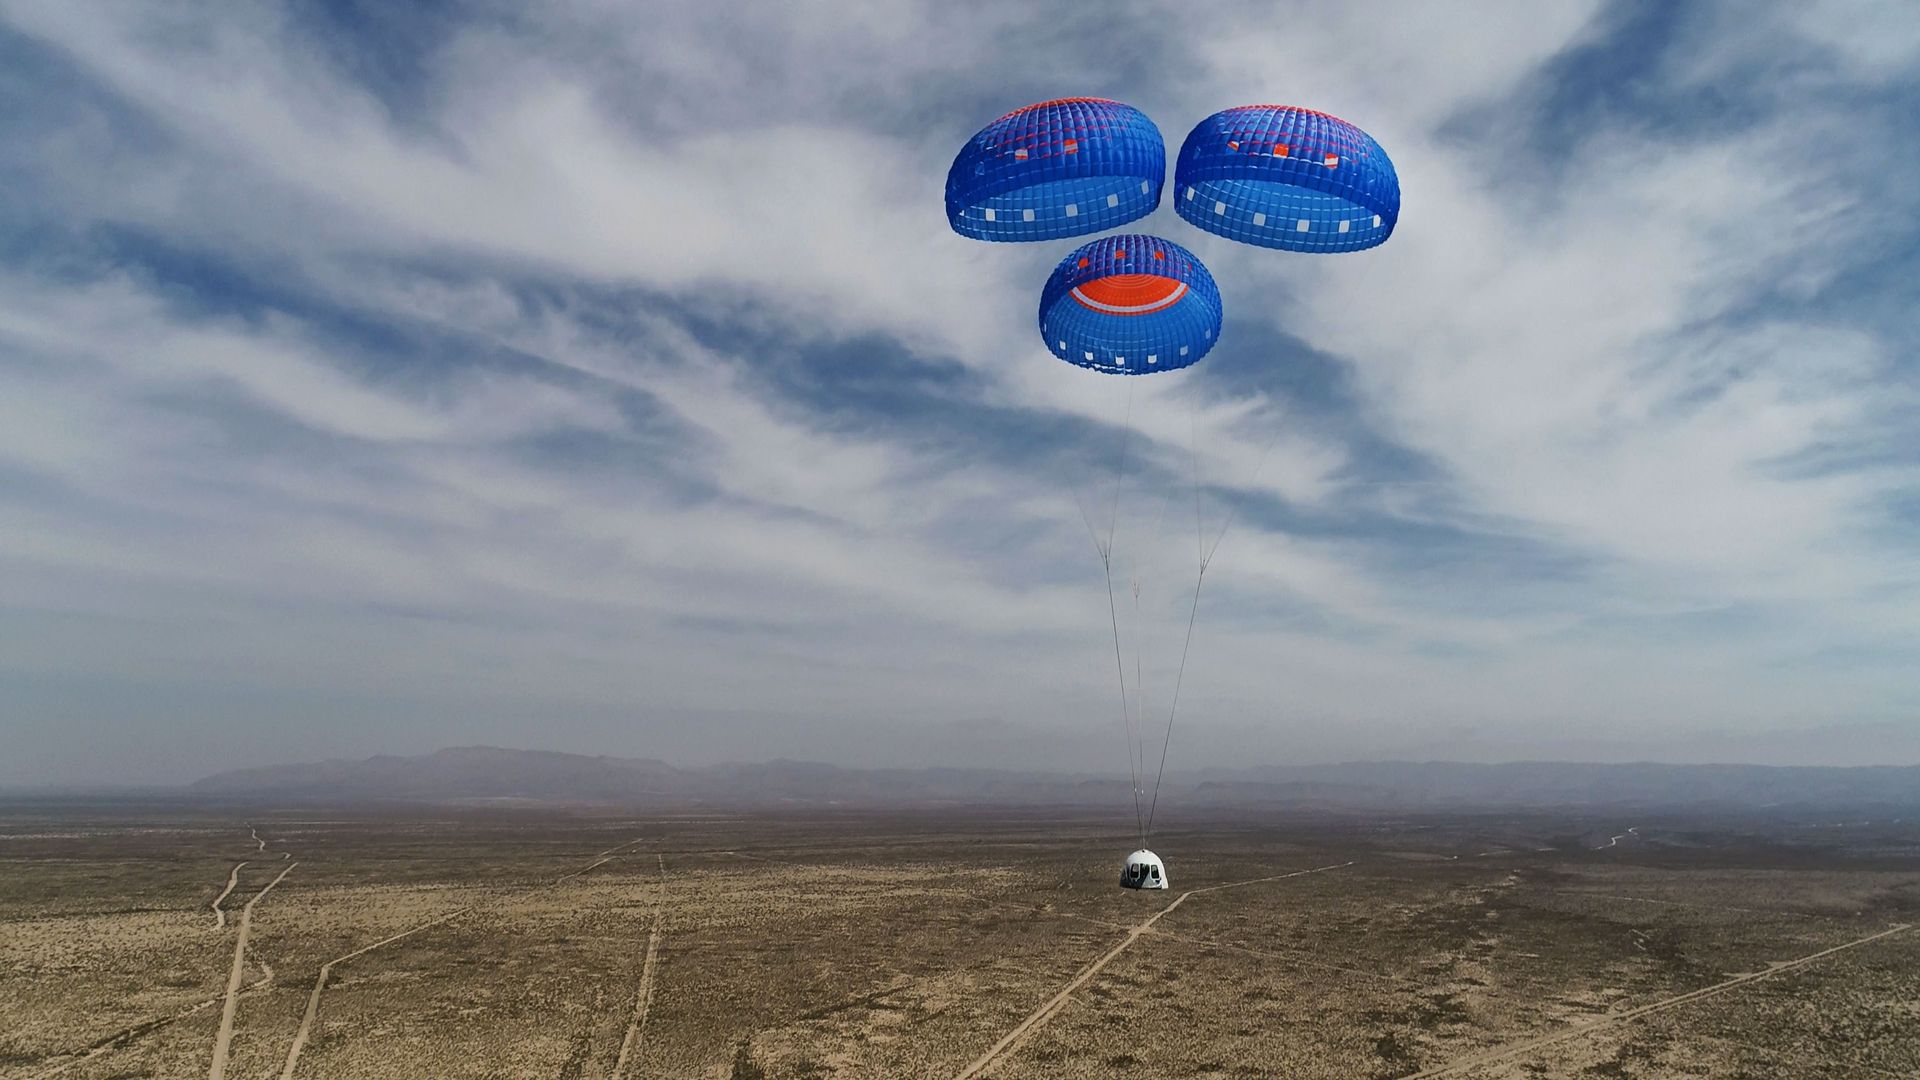 A Blue Origin capsule descending back to Earth against blue skies and clouds under three blue and red parachutes